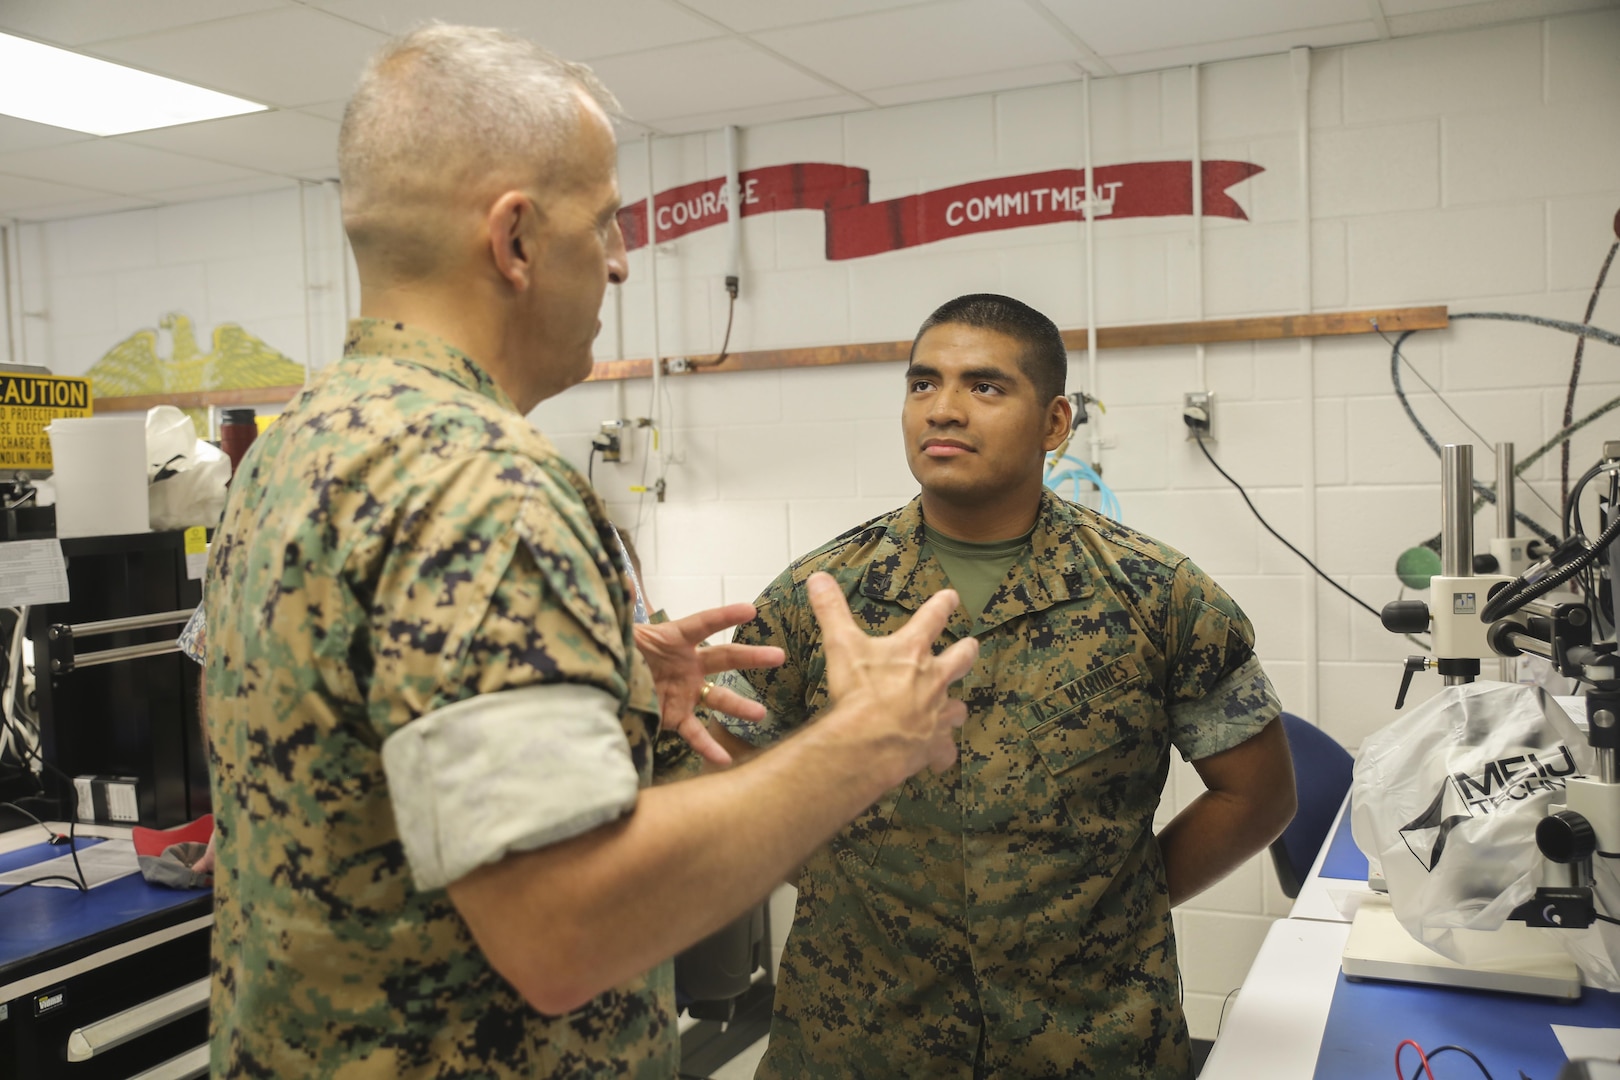 Lt. Gen. Michael Dana, left, Deputy Commandant of Installations and Logistics, speaks to Cpl. Edwin Flores, a telephone systems and personal computer intermediate repairer with 2nd Maintenance Battalion, at Camp Lejeune, N.C., Aug. 17. Dana was accompanied by several other distinguished visitors from the Department of Defense, who observed technological advancements in the logistical components throughout II Marine Expeditionary Force. (U.S. Marine Corps photo by Sgt. Lucas Hopkins)